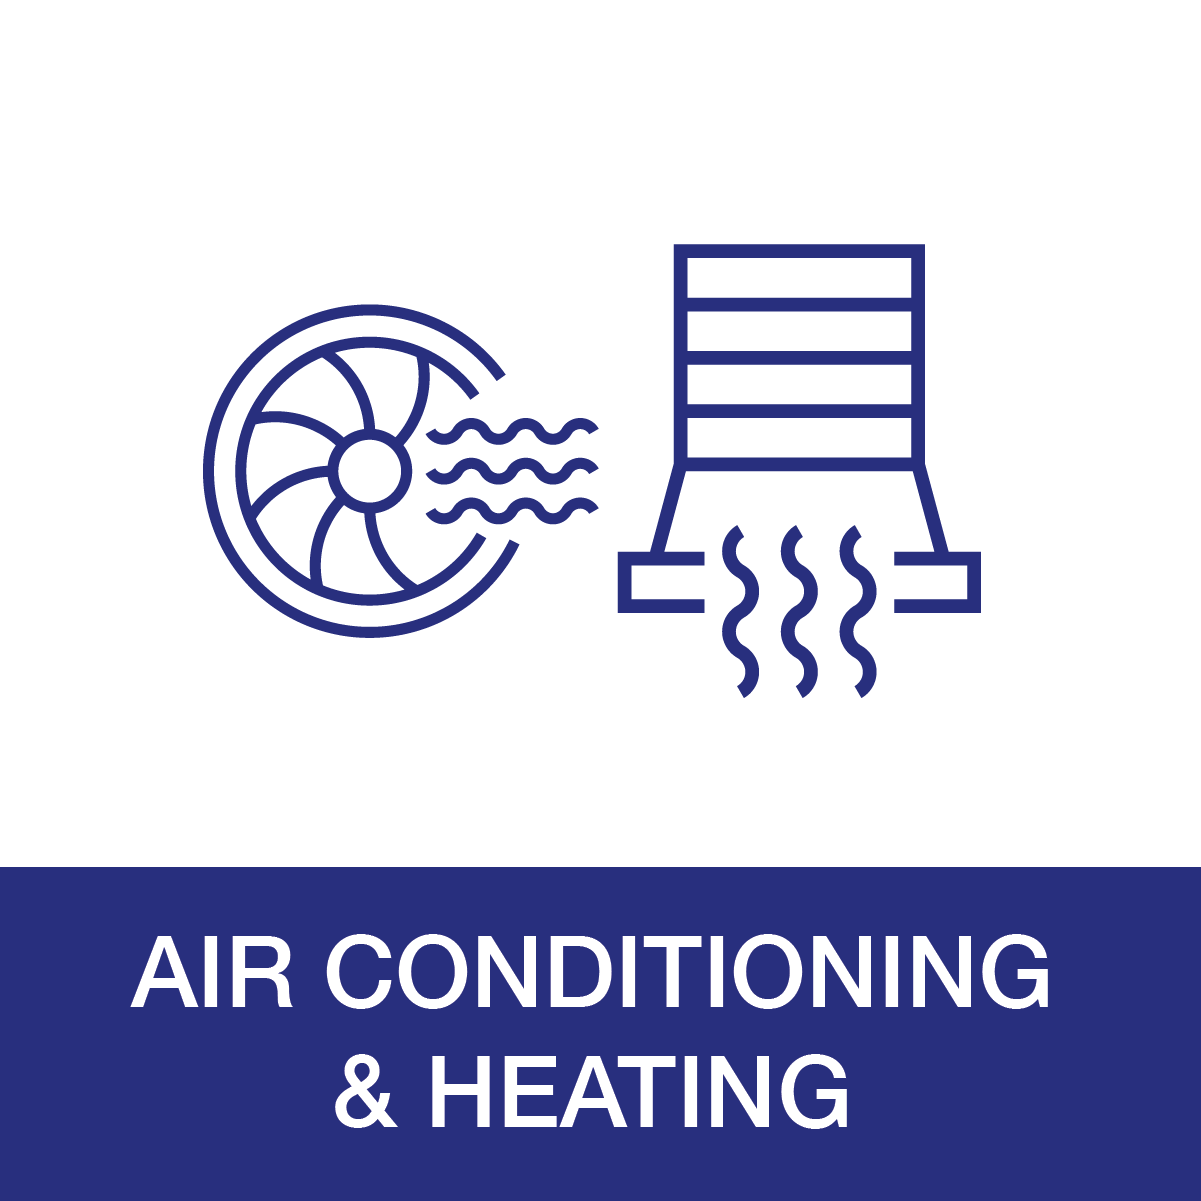 Air conditioning/heating 